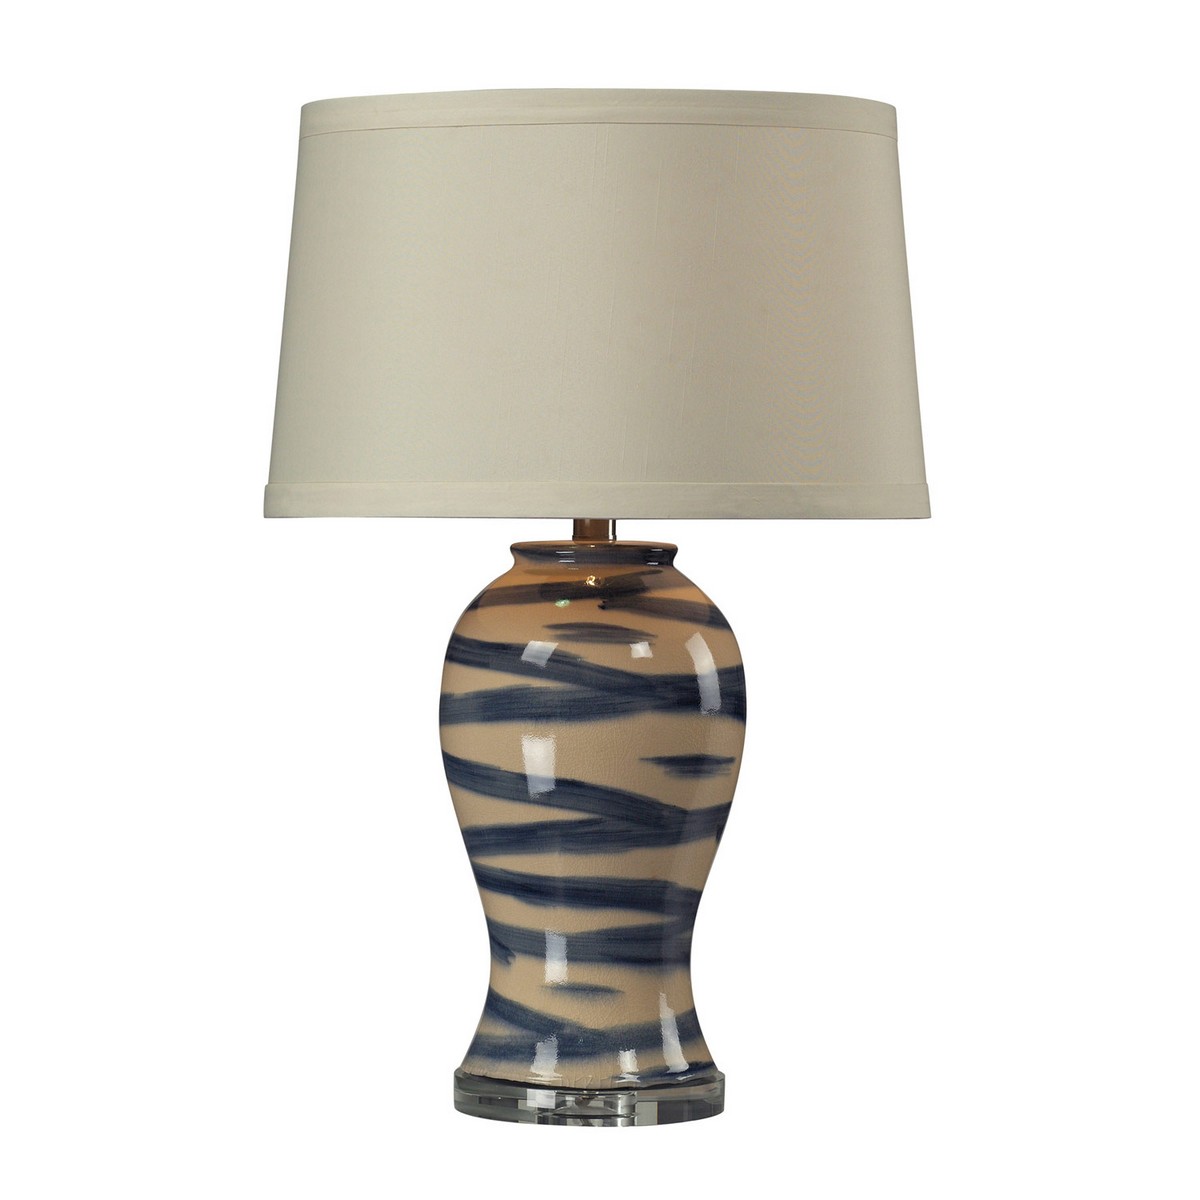 Elk Lighting D281T Table Lamp - Blue/Offwhite with Acrylic Base